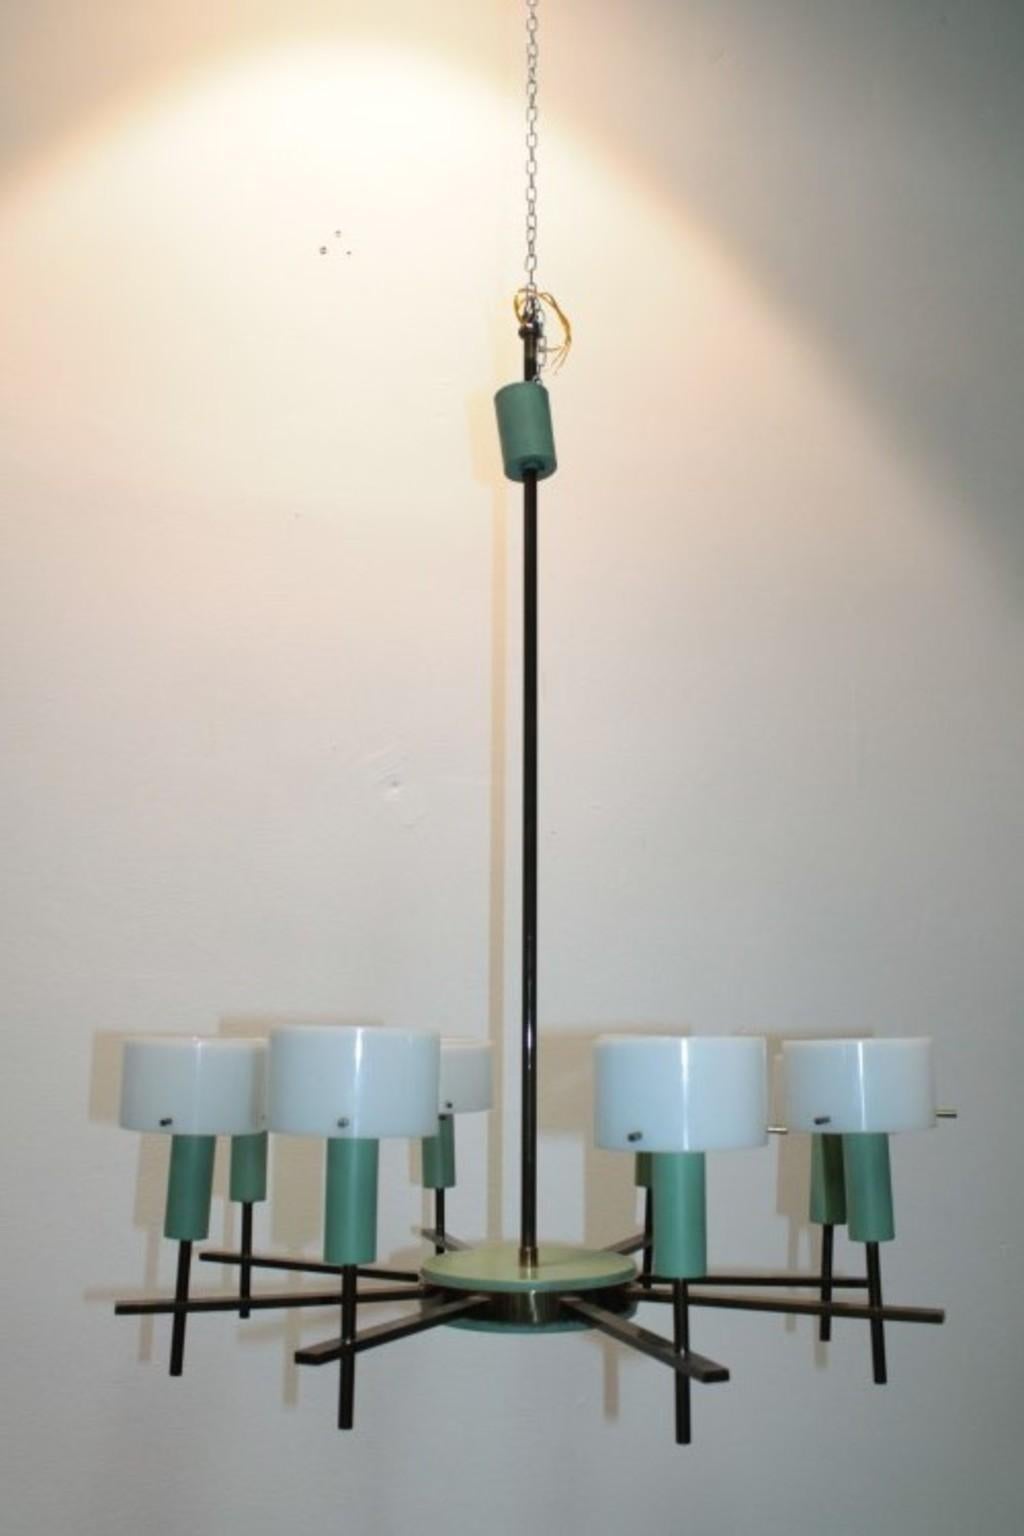 Wonderful ceiling lamp 1950s Italian manufacturing attributed to Stilux-Milano.